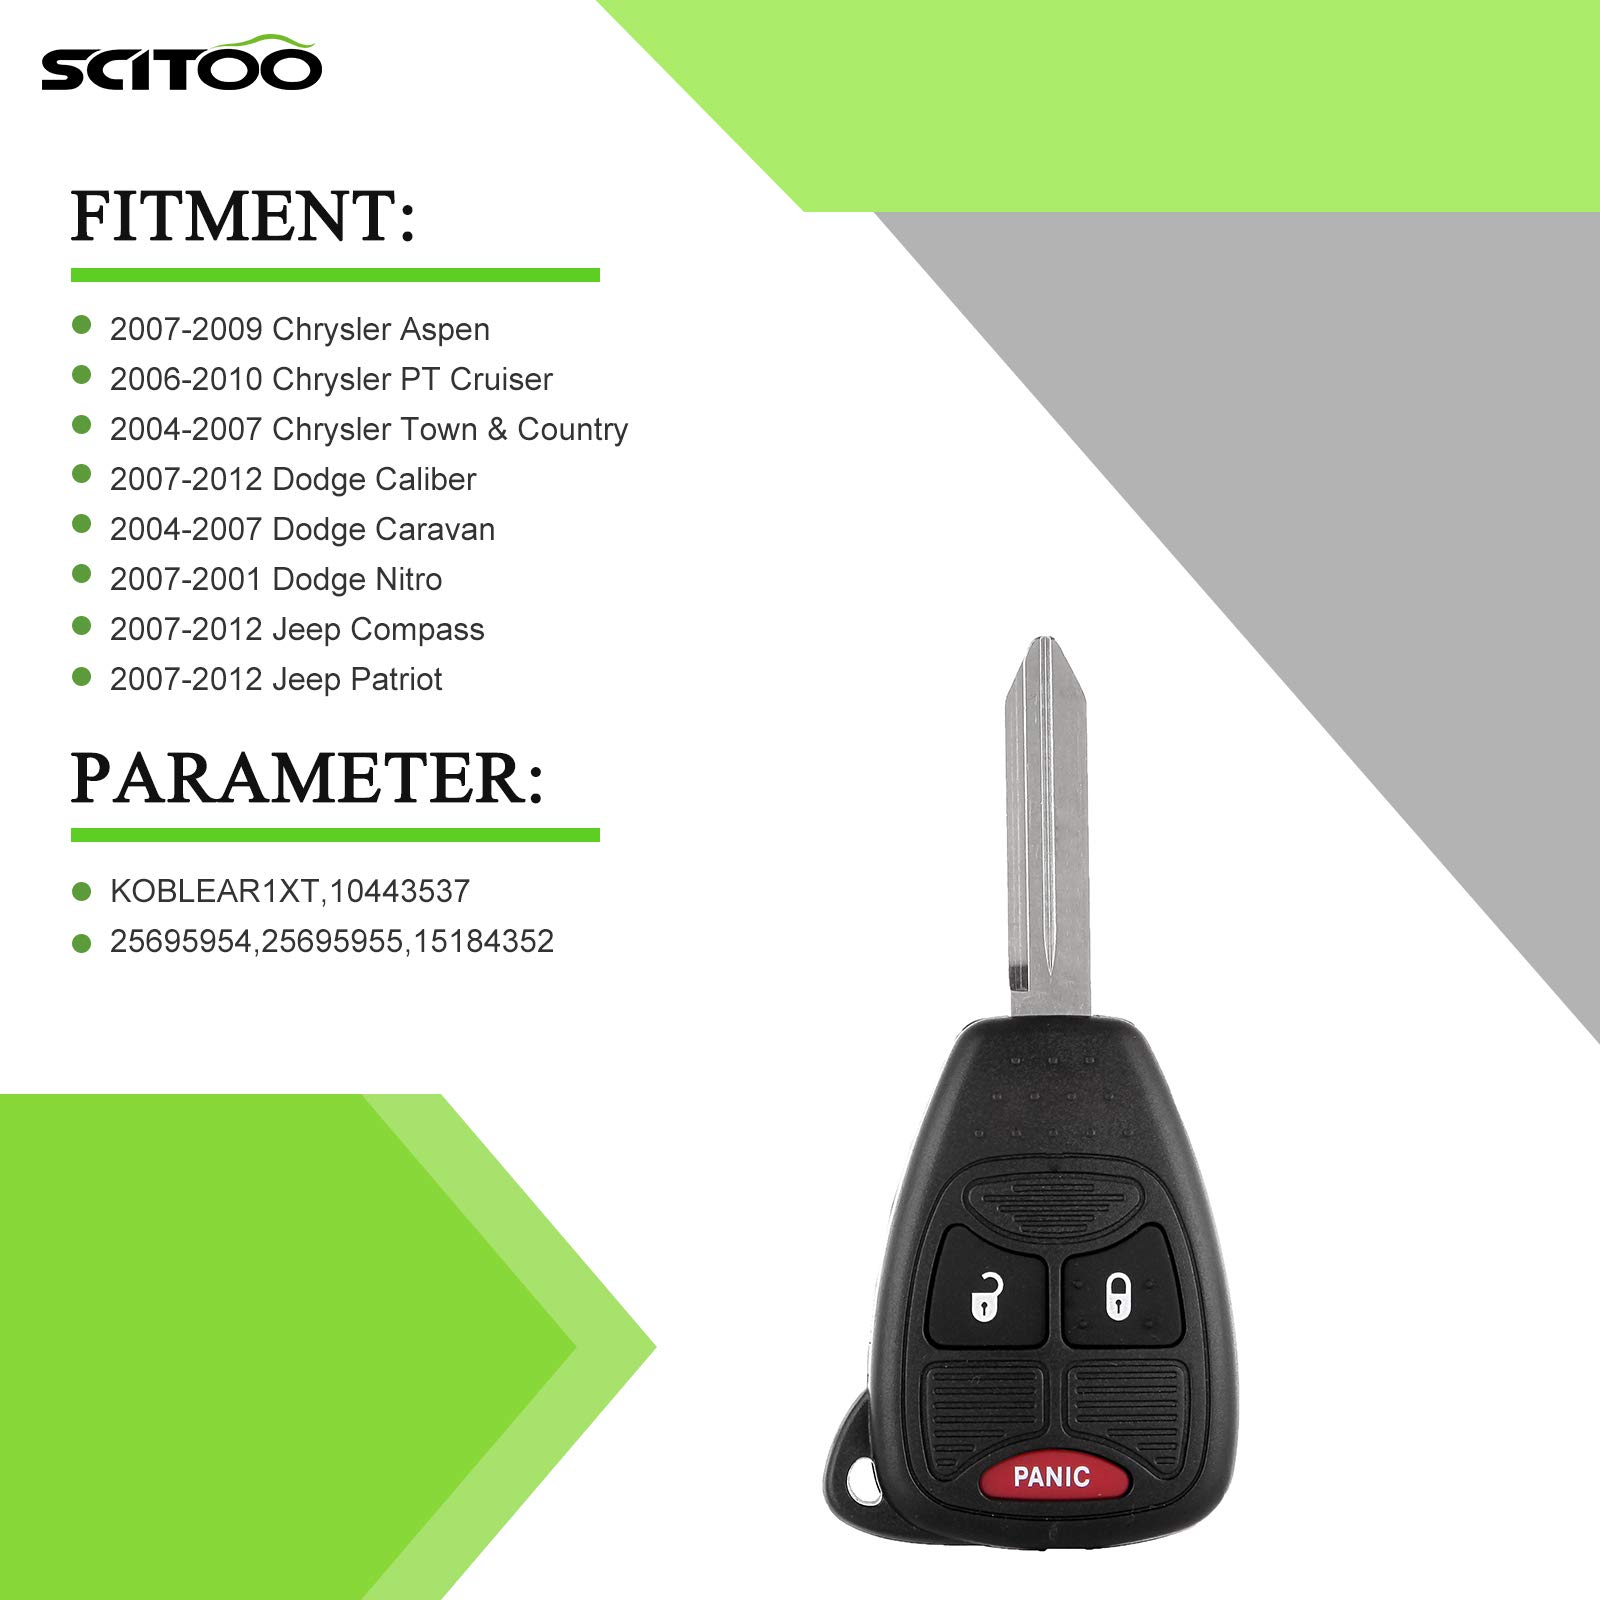 SCITOO 1PC 3 Buttons Keyless Entry Remote Car Key Fob Case Replacement for Dodge Buick Jeep Chrysler 2004-2012 FCC OHT692713AA-17 M3N5WY72XX-Q